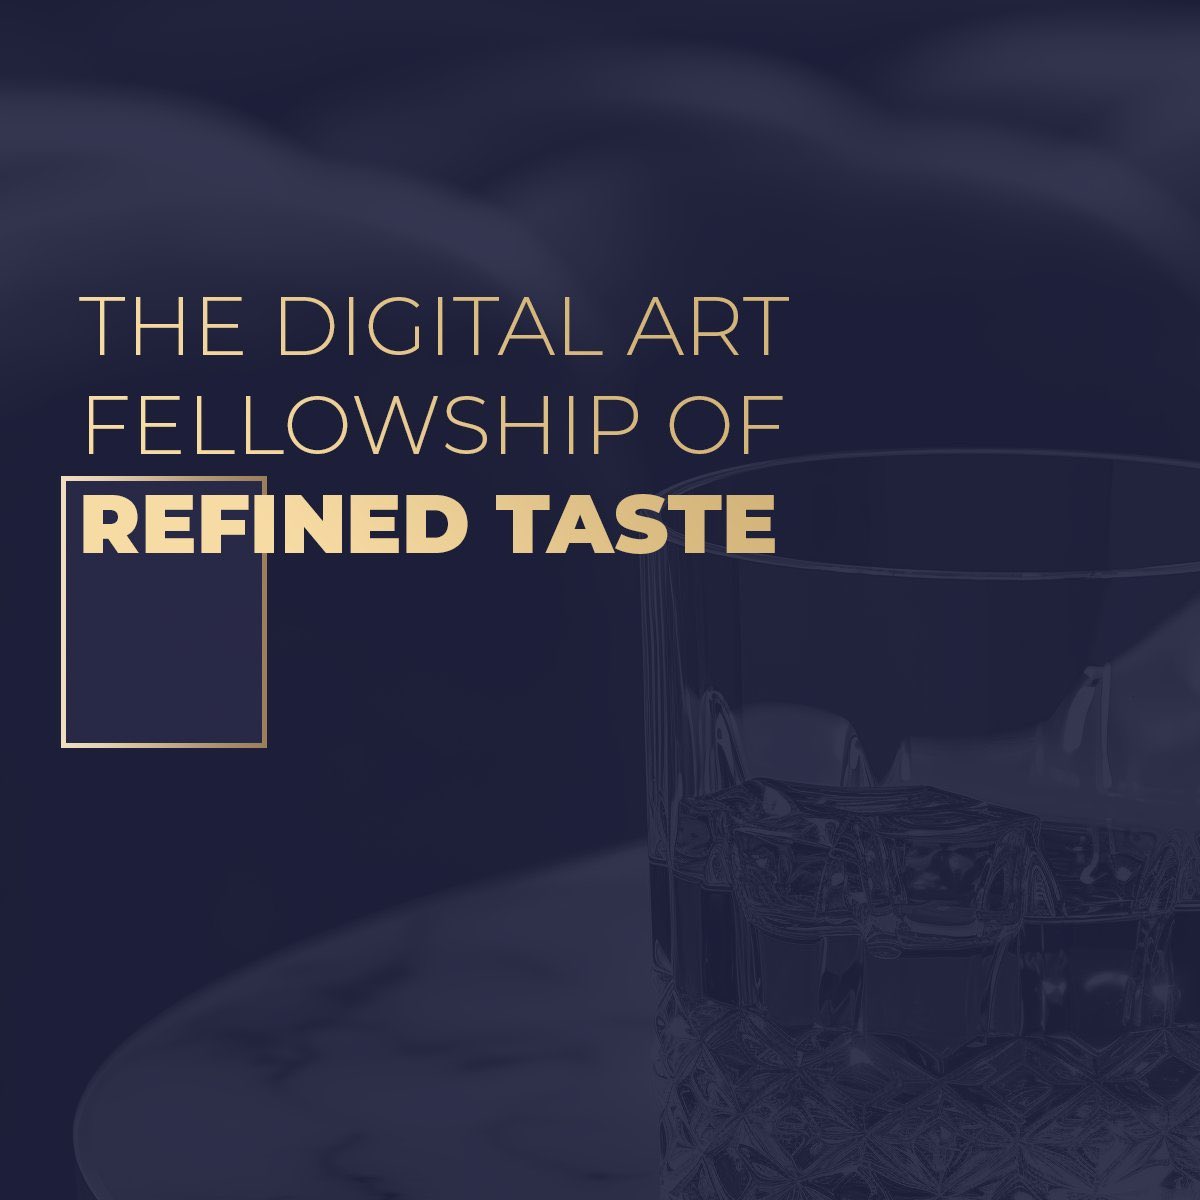 Are you an artist, art lover, or collector? @ThePatrunos is the place to be. The digital art fellowship of refined taste. 🥃